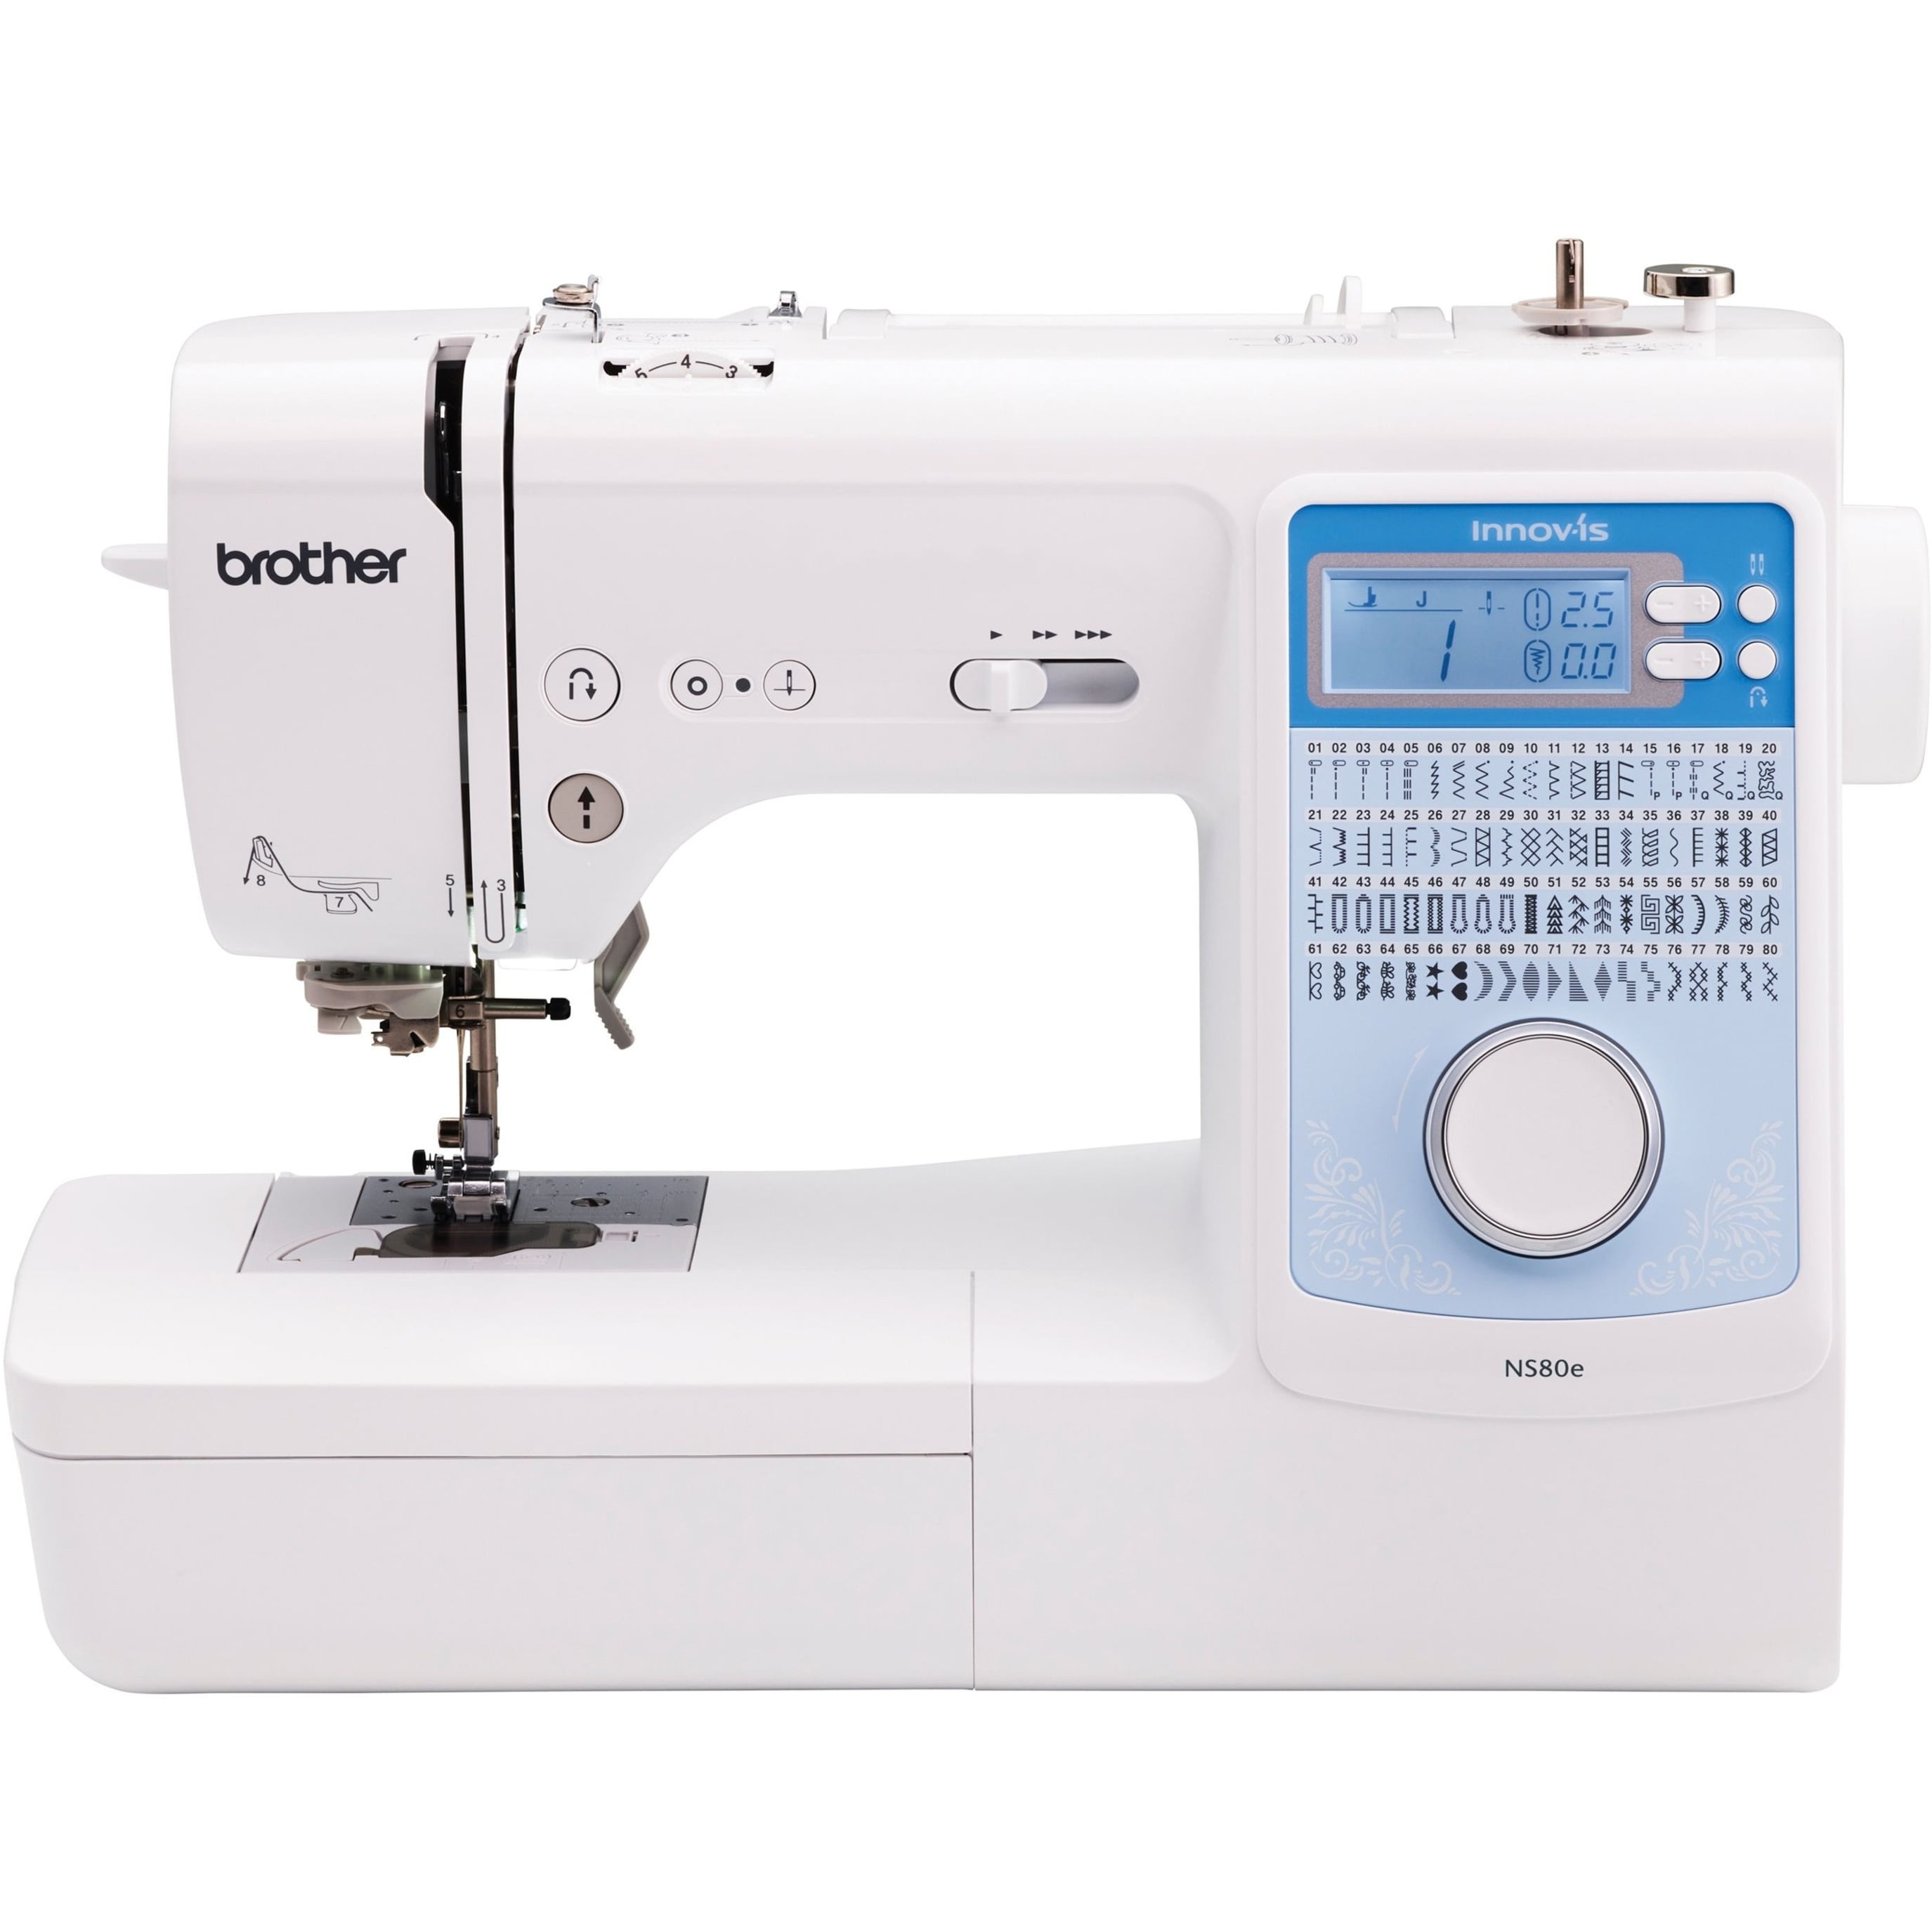 Poolin Eoc2720 Homeuse Sewing Machine Heavy Duty Computerized with Built-In 200 Stitches, Size: 18.5